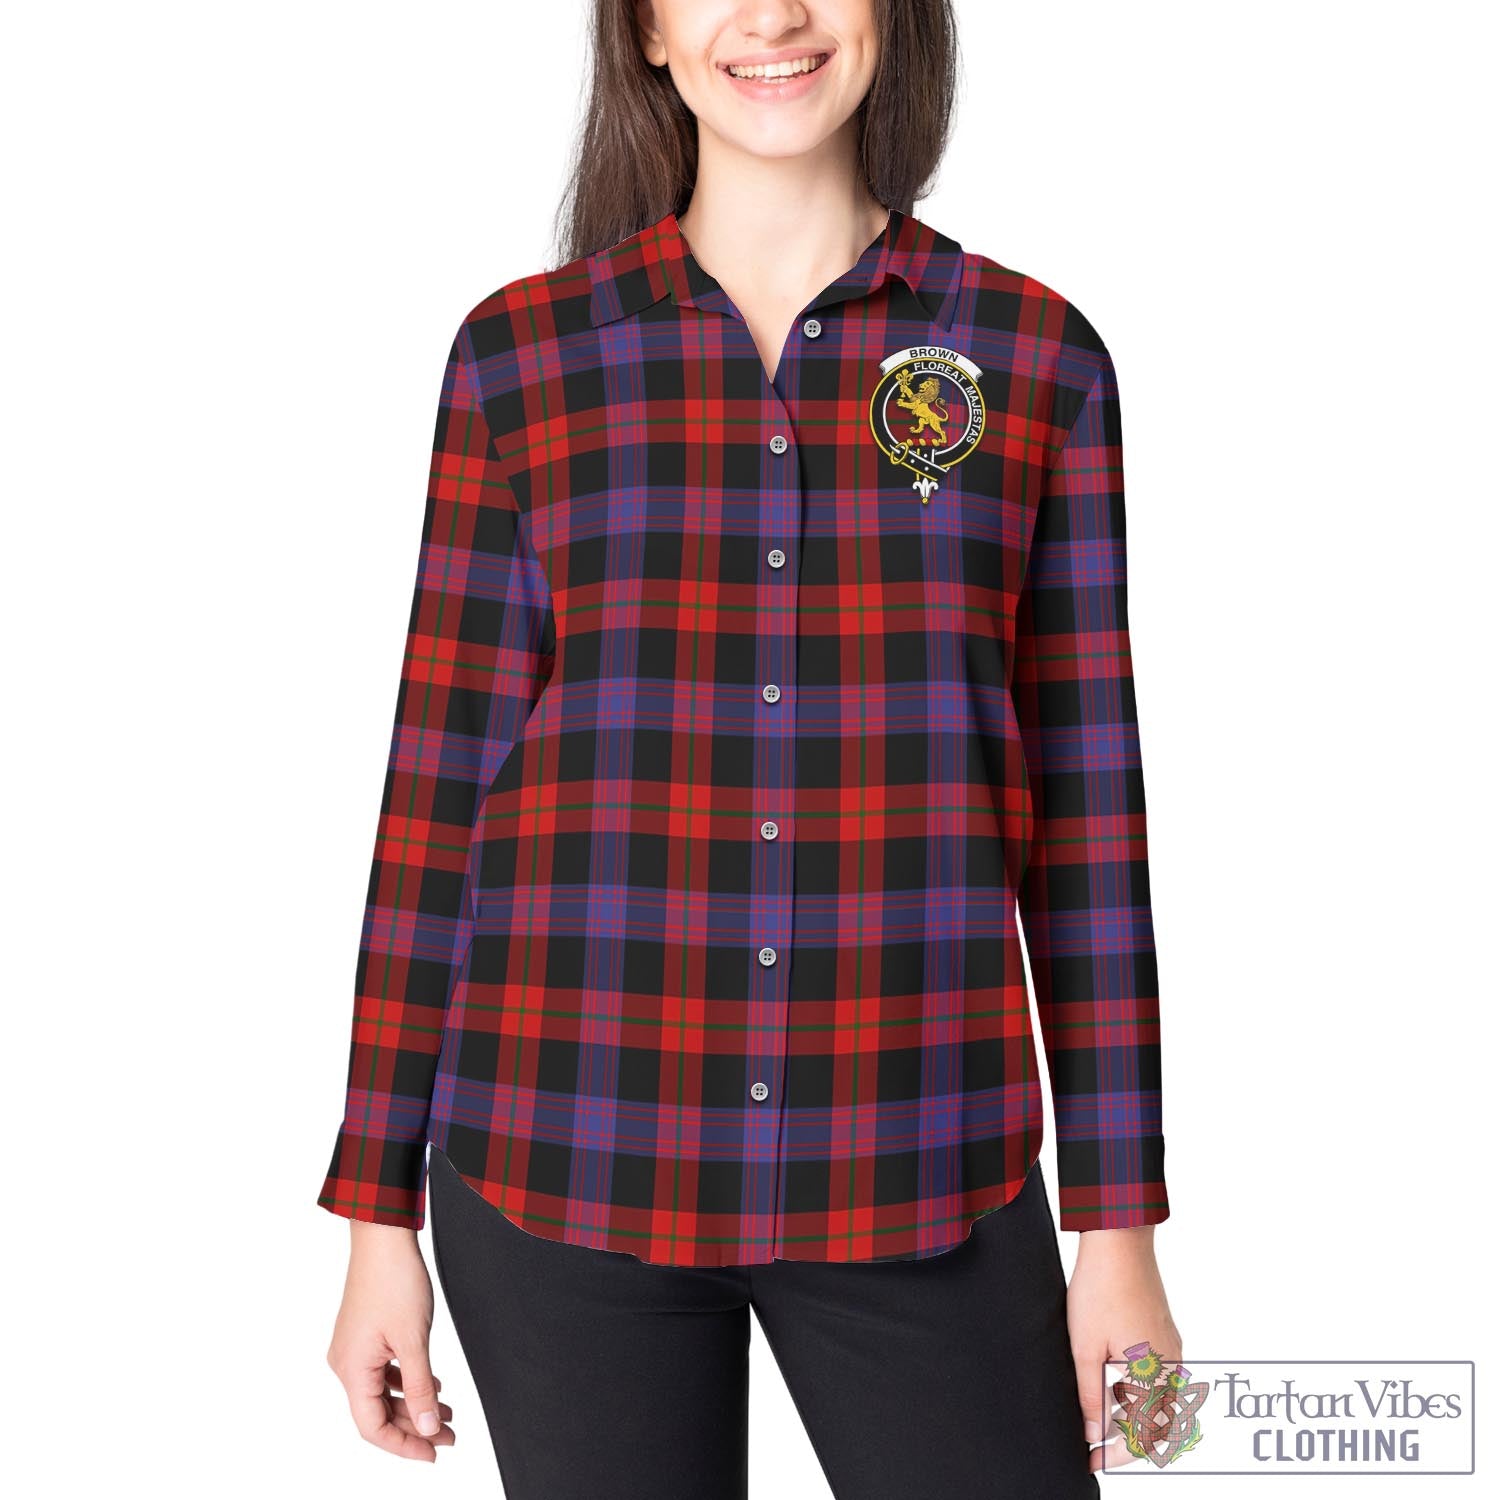 Tartan Vibes Clothing Brown Tartan Womens Casual Shirt with Family Crest